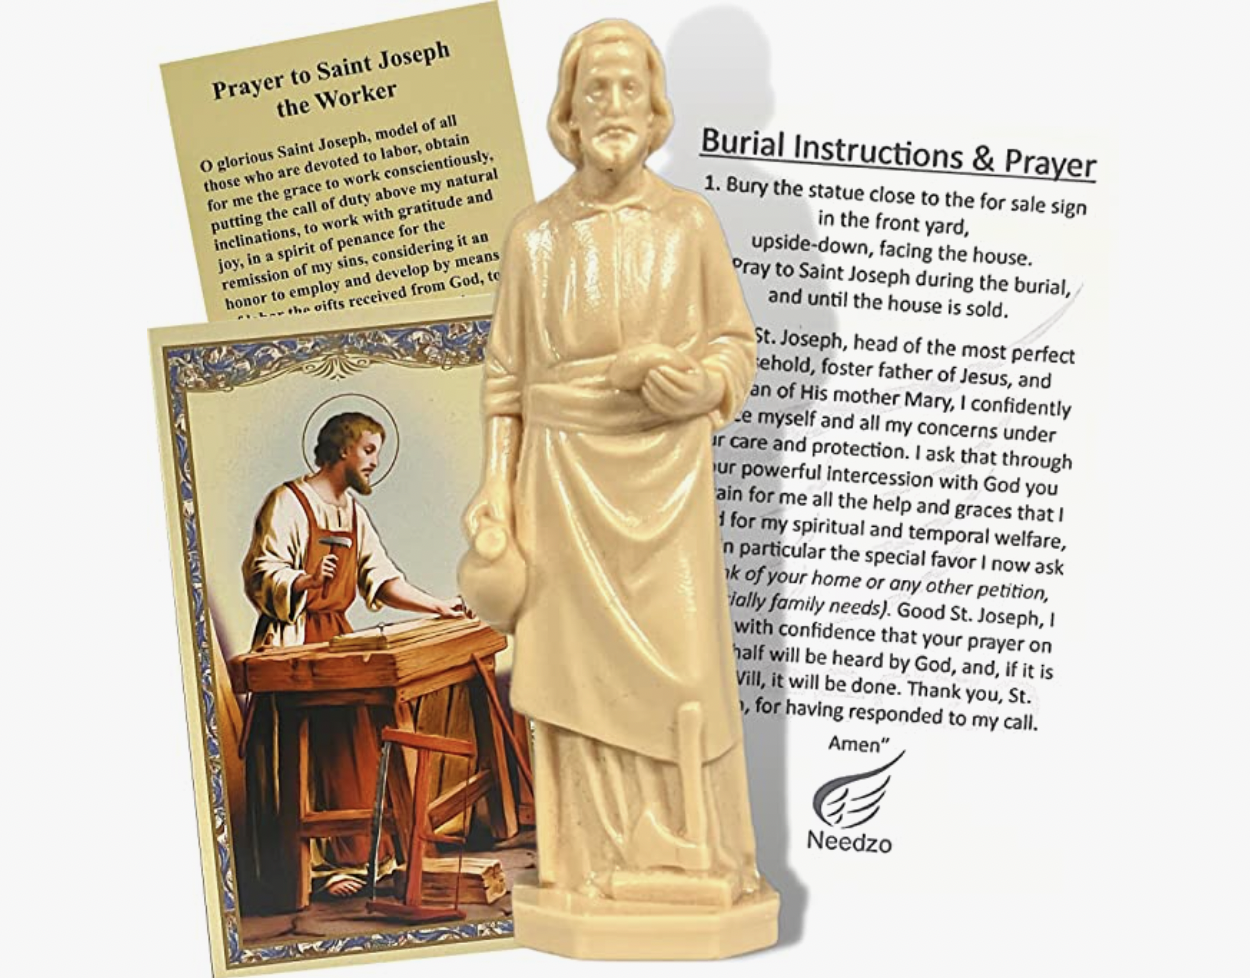 St. Joseph's statue with burial instructions